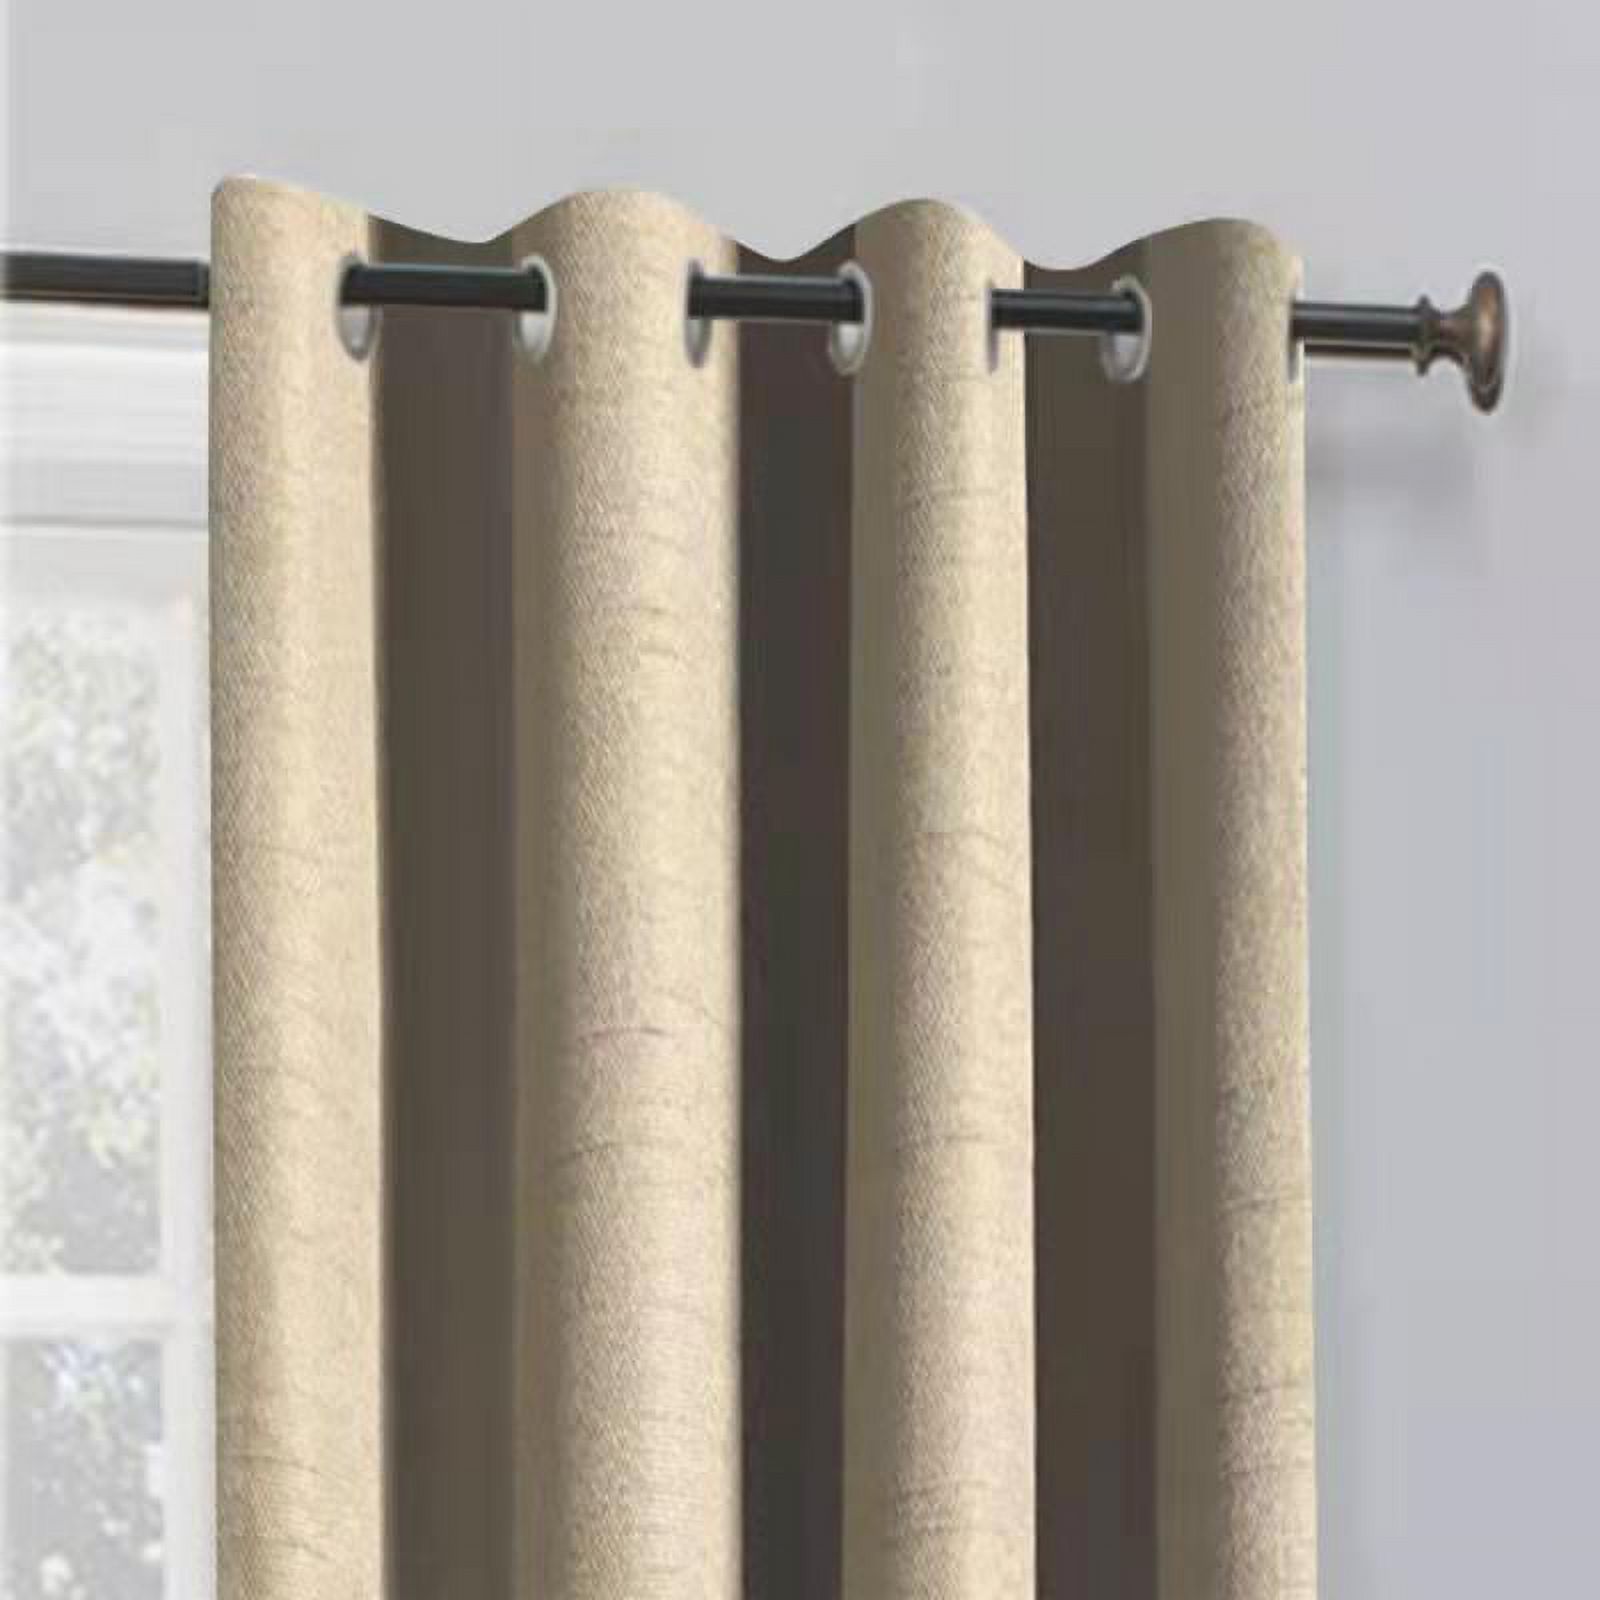 Better Homes & Gardens Basketweave Curtain Panel, 50" x 84", Beige - image 2 of 6